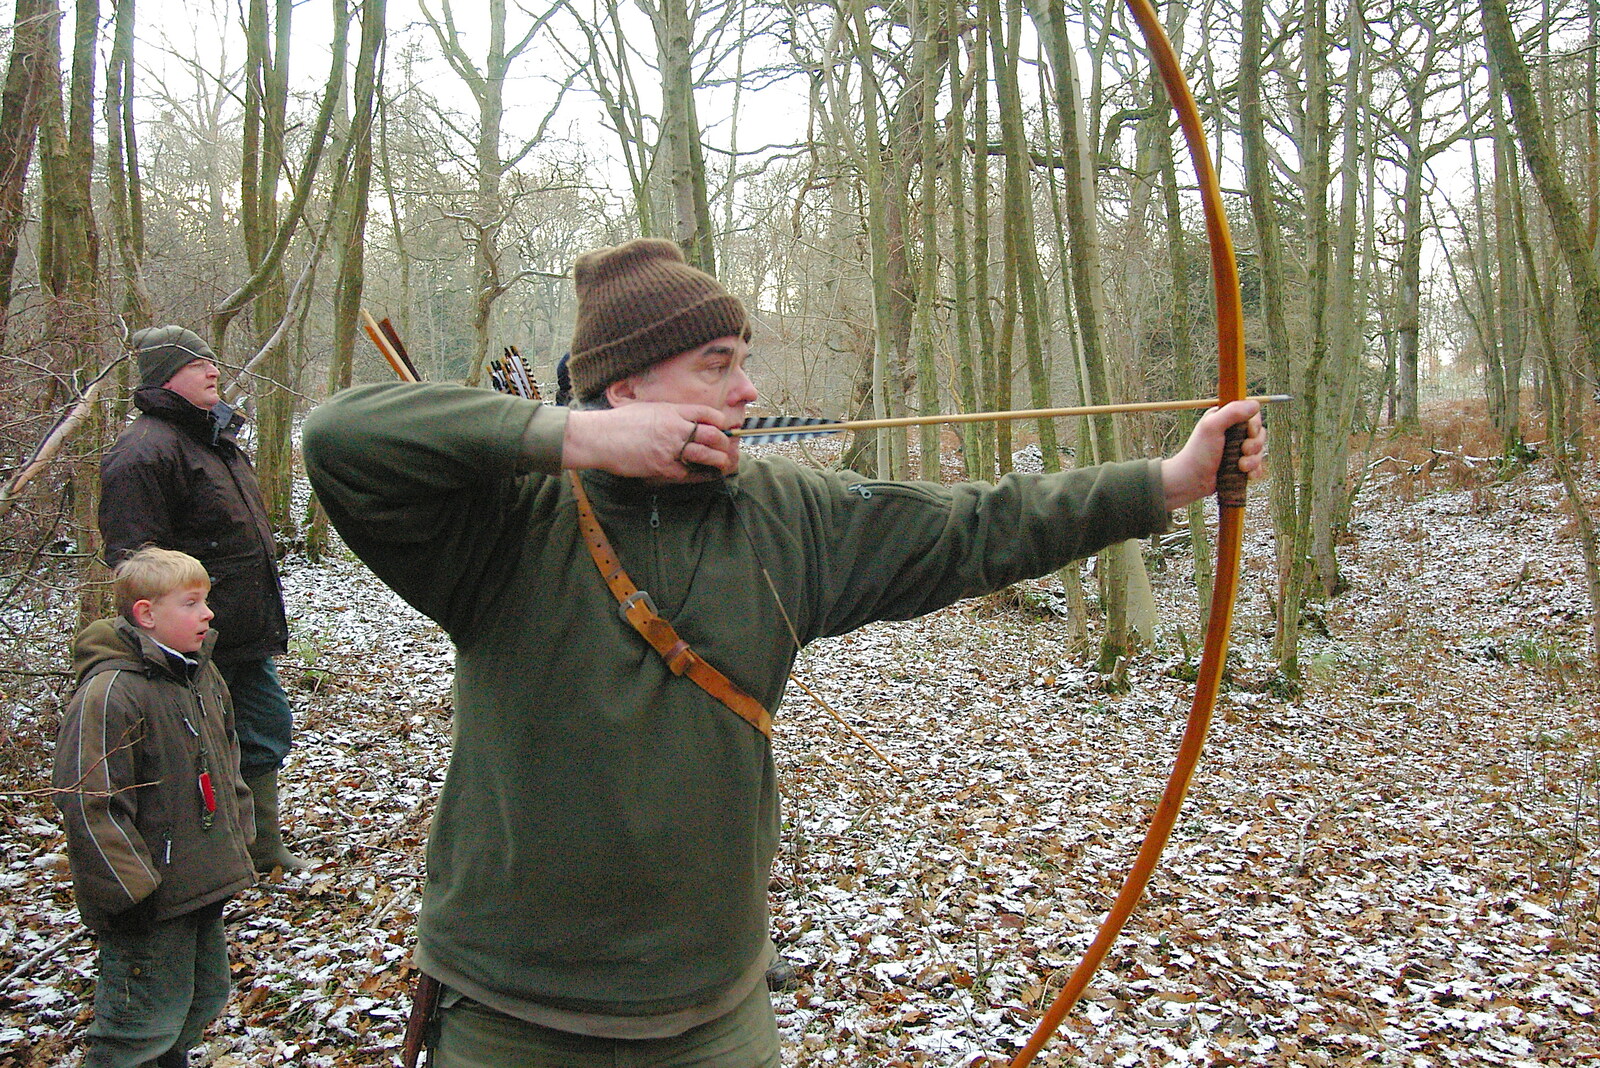 Chris Boyton lets an arrow off from Walk Like a Shadow: A Day With Ray Mears, Ashdown Forest, East Sussex - 29th December 2005